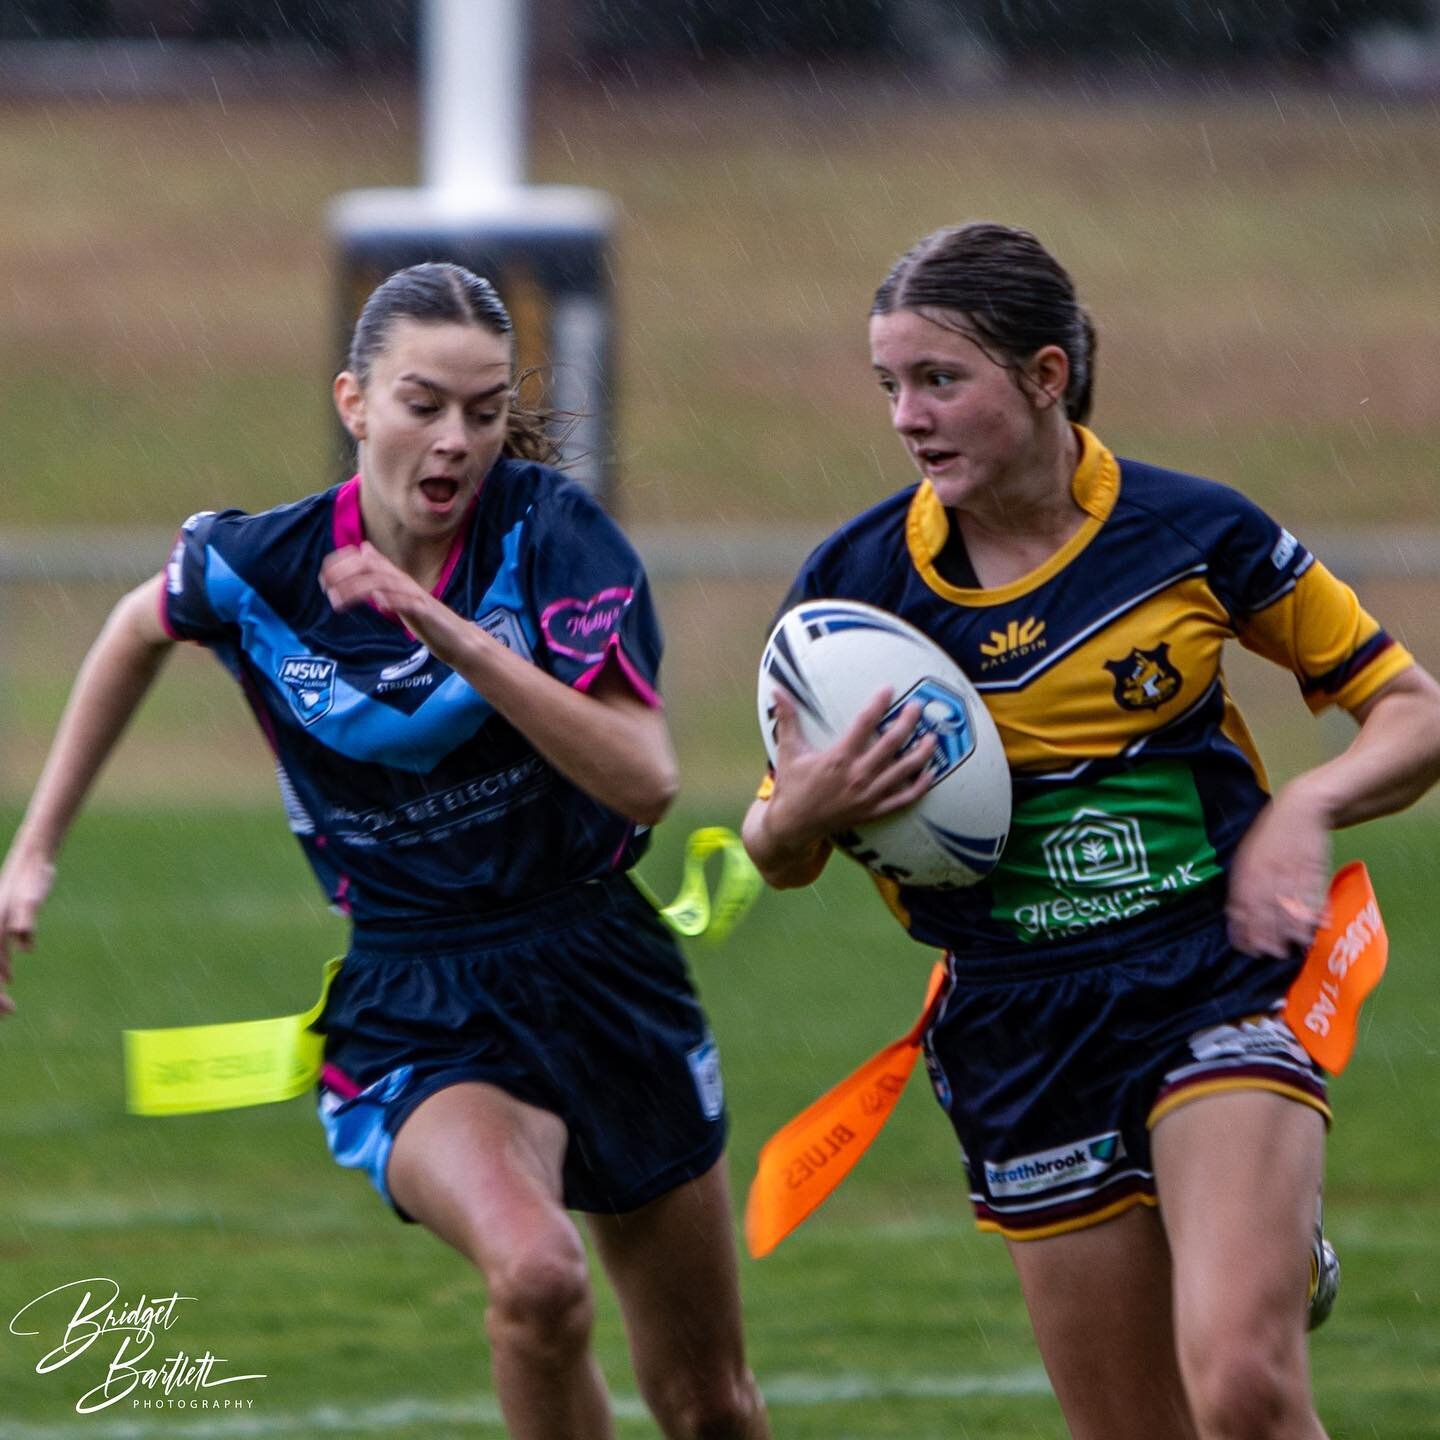 Rain, rain and more rain - U17s league tag St John&rsquo;s Blue V Macquarie brought the heat to the field! 💪🏻🏉 Congratulations to all the talented girls on a fantastic game of league tag, ending in a hard-earned 16 all draw 🌧️☔️ More action-packe